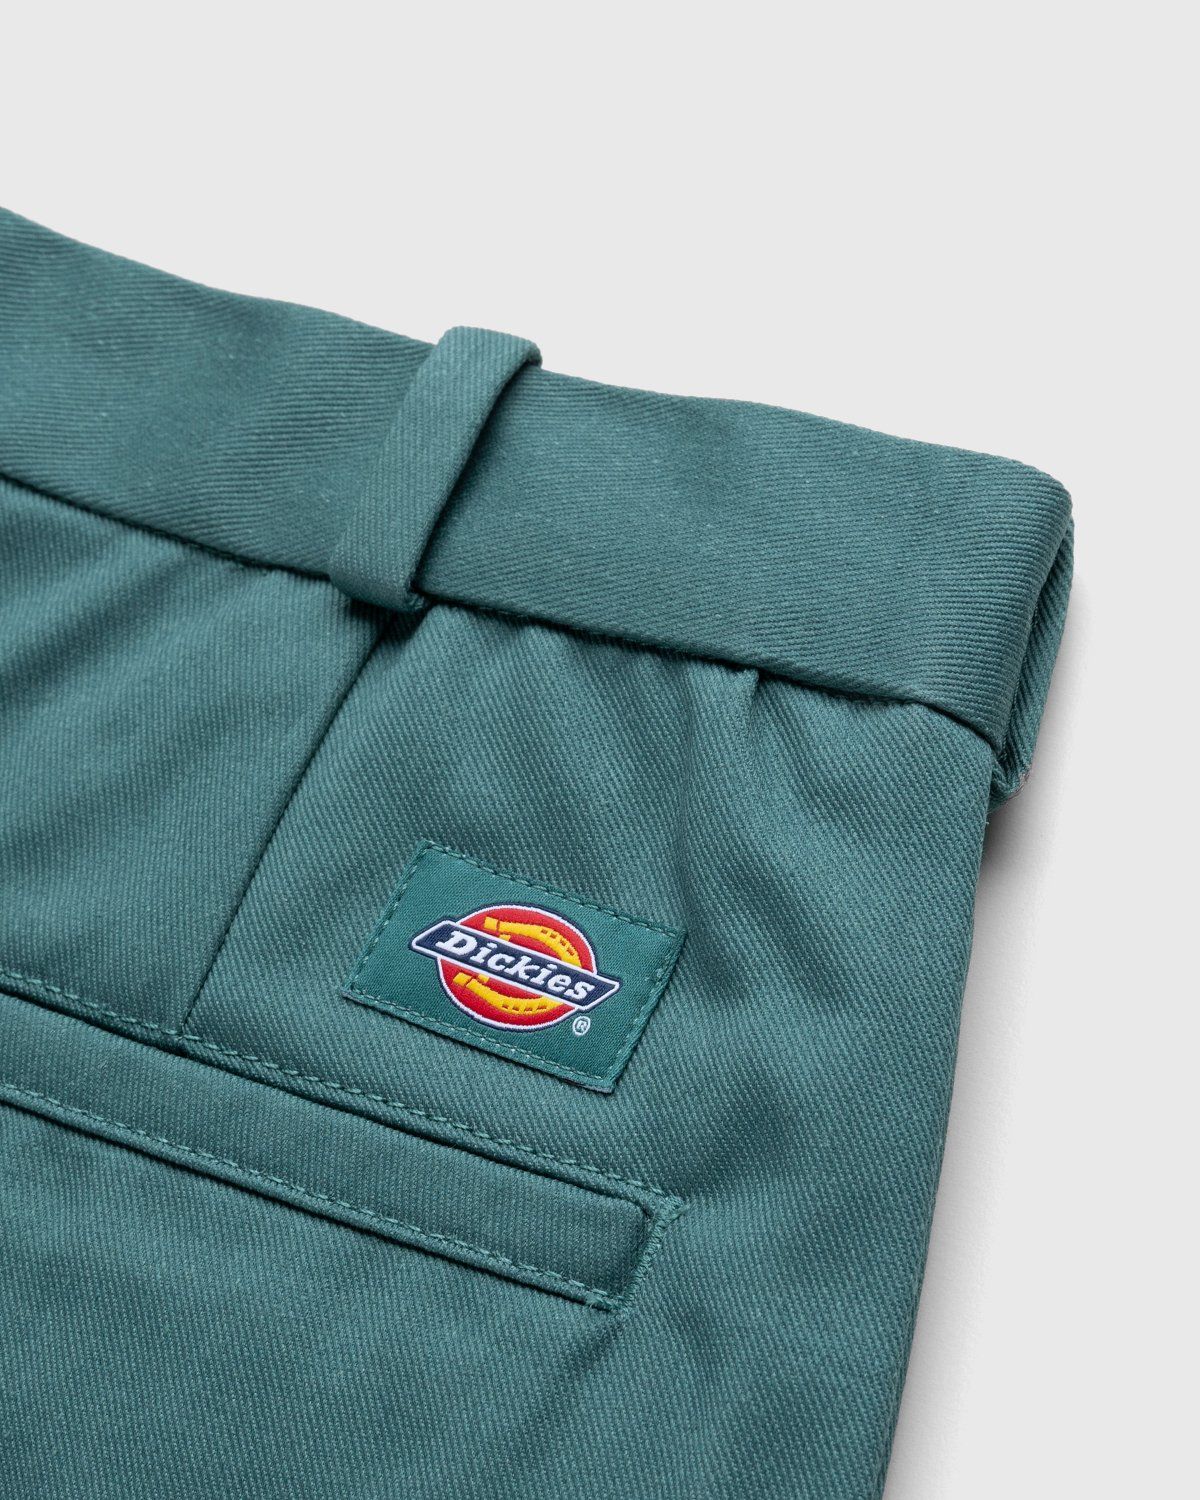 Highsnobiety x Dickies – Pleated Work Pants Lincoln Green - Pants - Green - Image 5